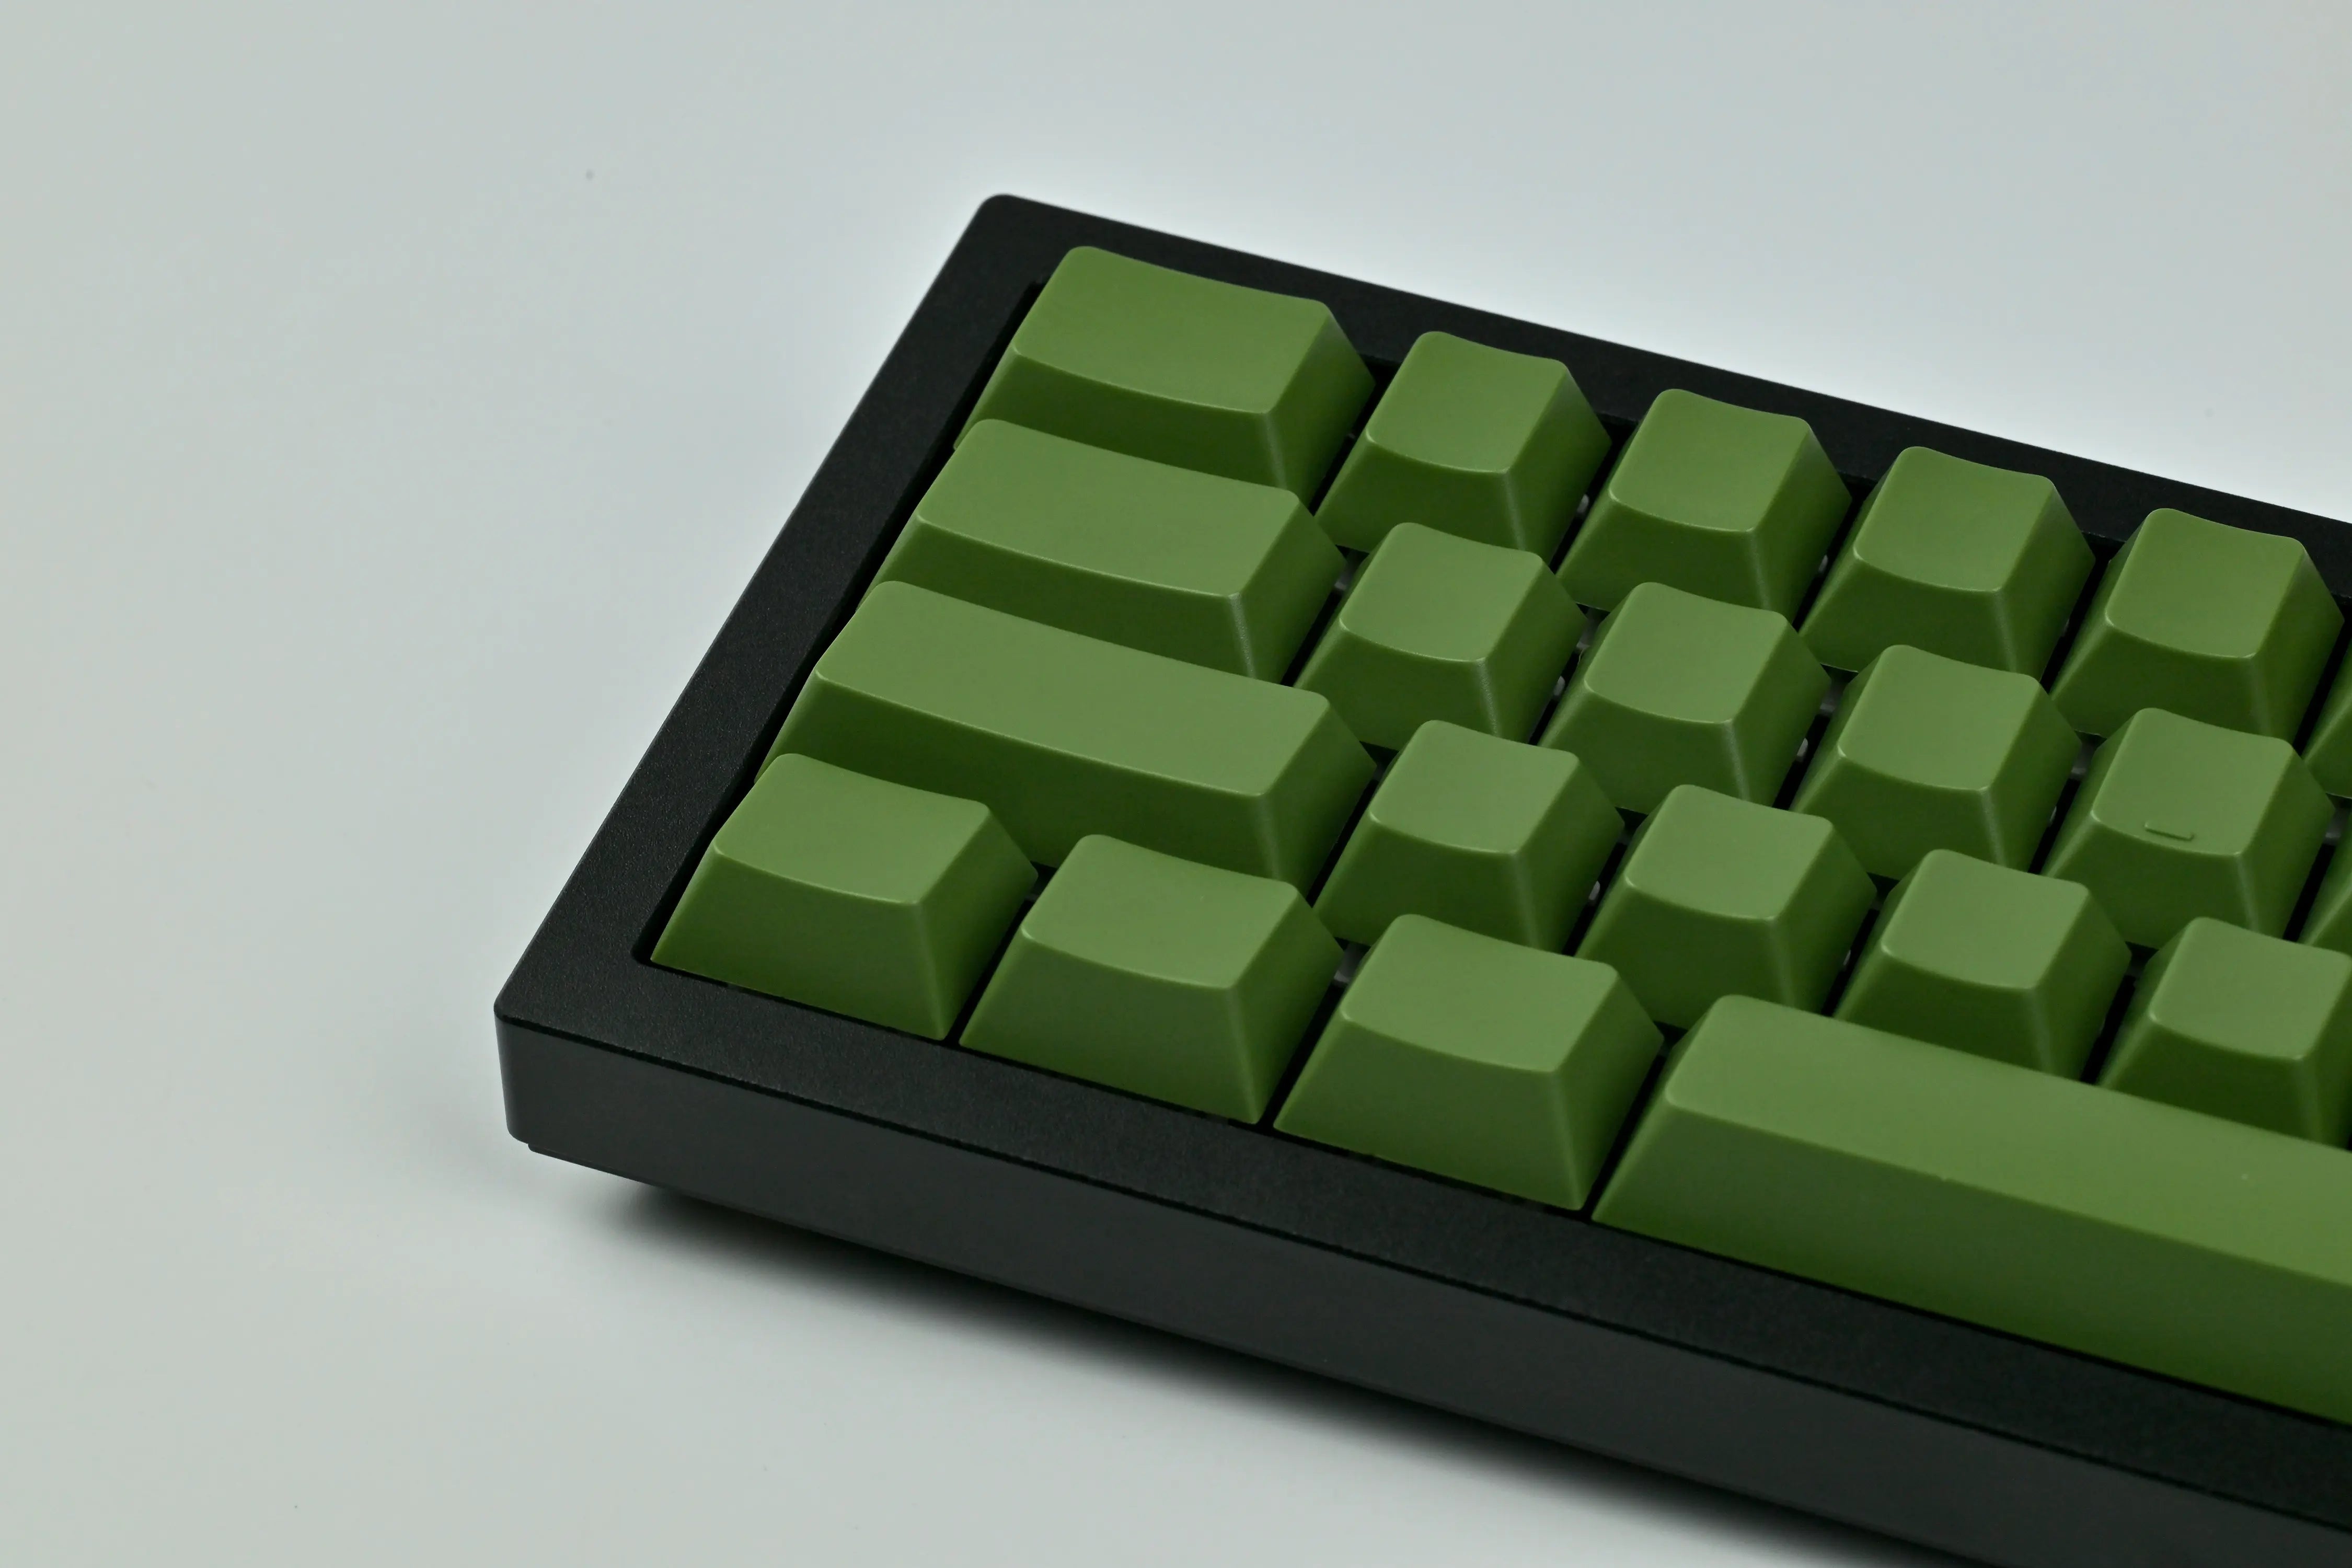 Keyreative ABS Cherry Profile Olive Blank Keycaps